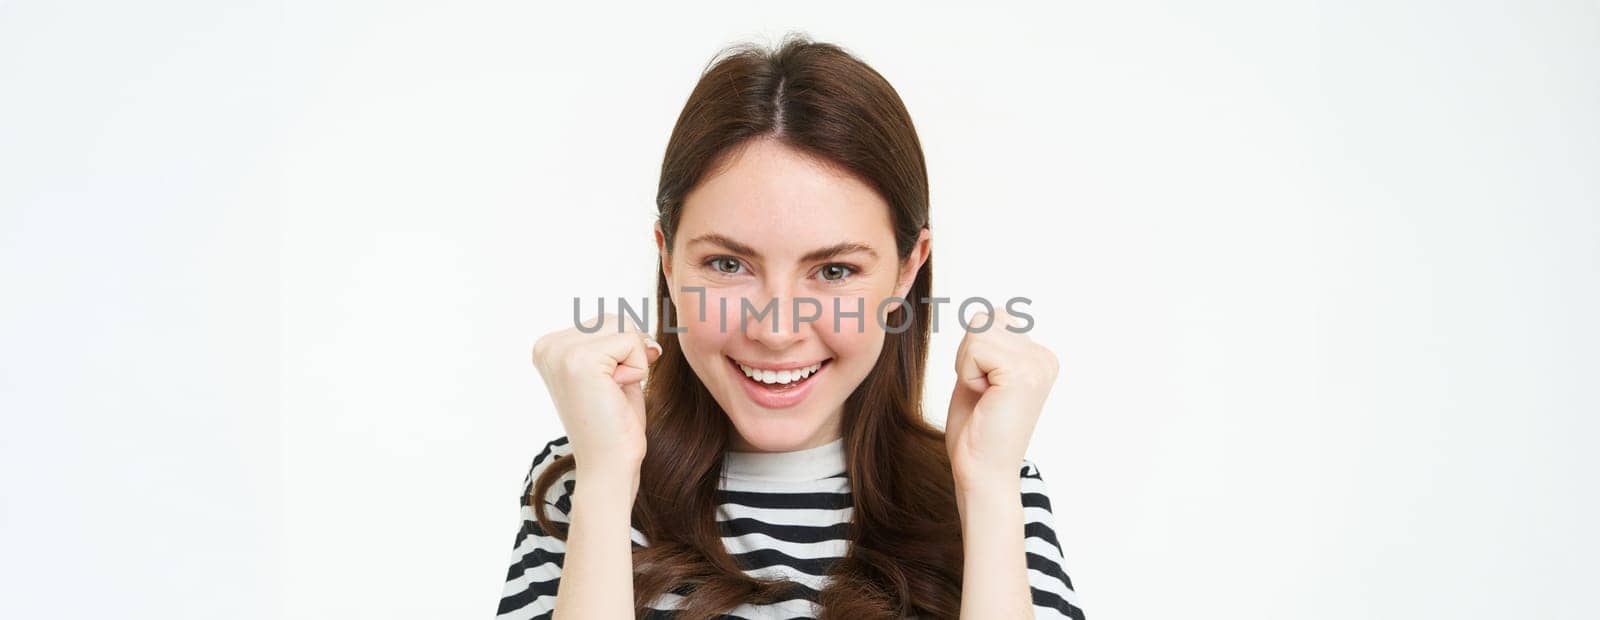 Image of young woman looking with pleased, satisfied face at camera, winning, shaking hands in triumph, celebrating victory, achievement, standing over white background.